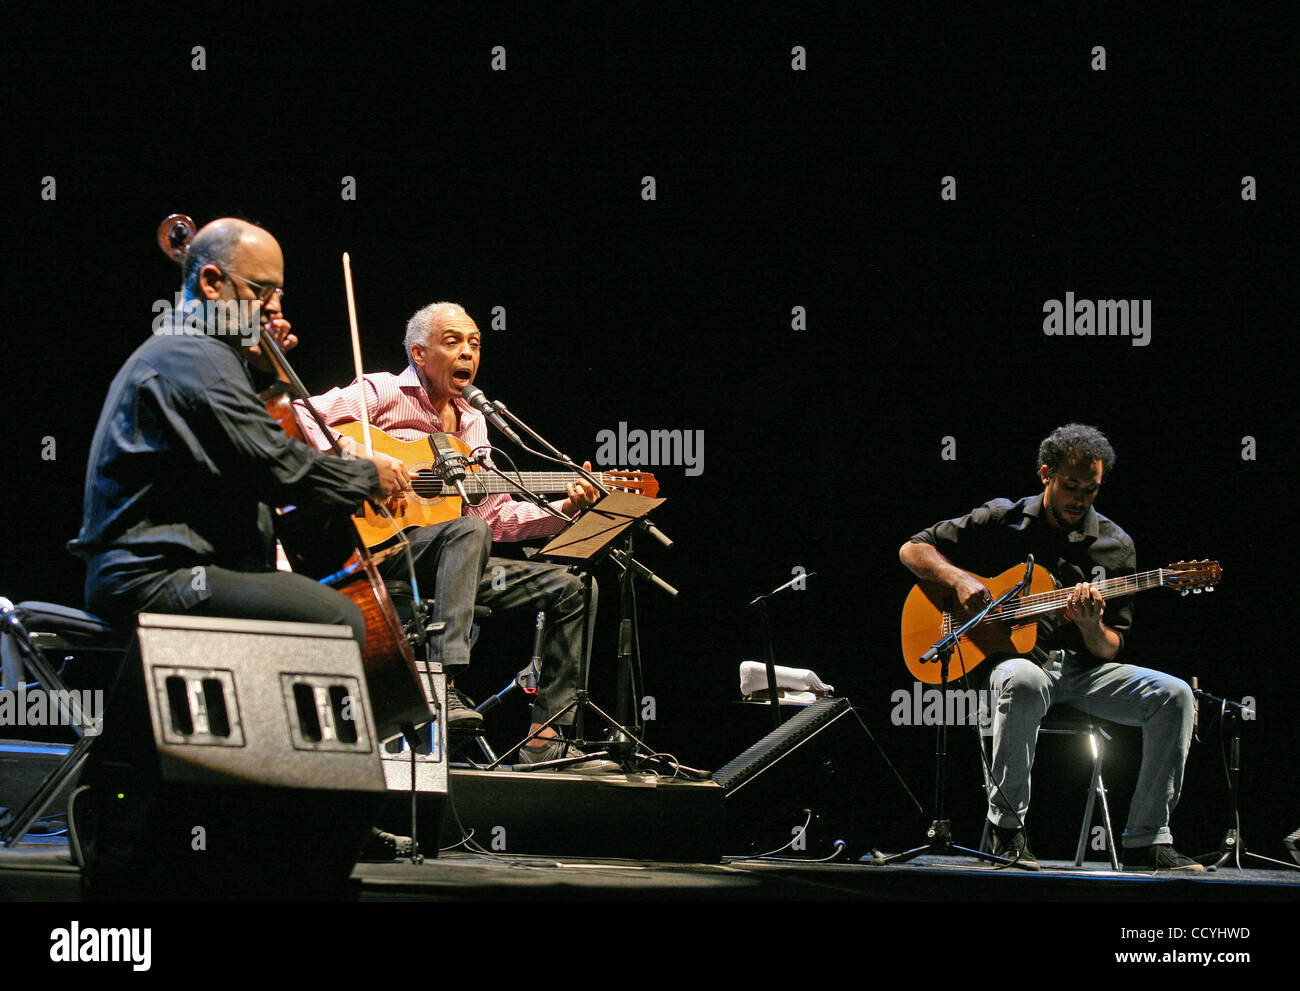 Brazilian singer and former Minister of Culture Gilberto Gil (center) performs with Jaques Morelenbaum (L) and Bem Gil (R) on stage during the String Concert at UCLA Royce Hall in Los Angeles. (Photo by Ringo Chiu / Zuma Press) Stock Photo